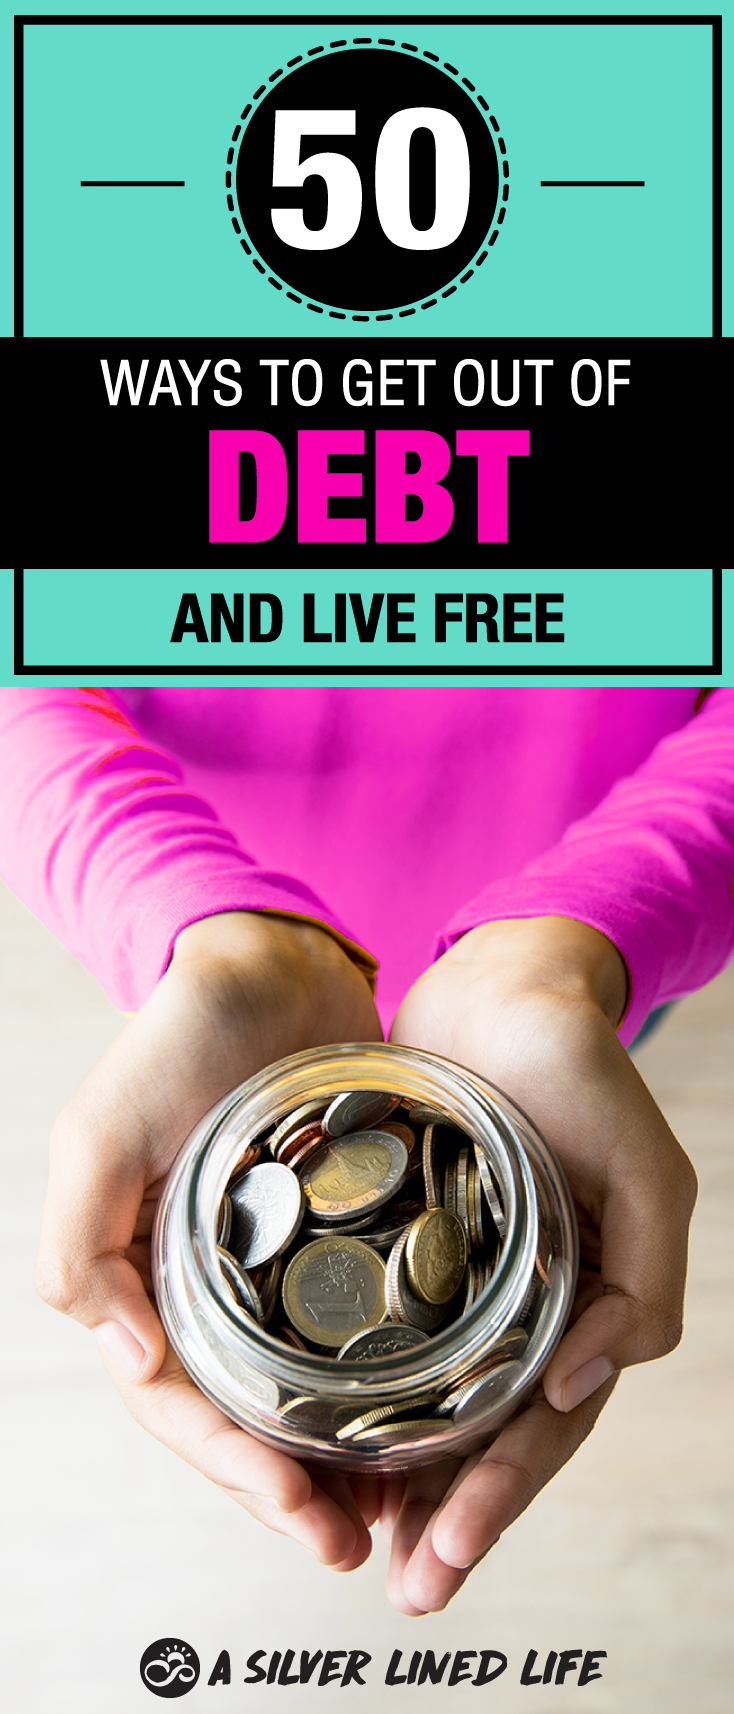 Save money and make money by getting on a budget and getting debt free! The best Frugal living advice. Here’s how to get out of debt fast with these 50 unique and out-of-the-box ideas from David Ramsey to FREE printables that will help you get out of debt fast. #SLL #debt #savemoney #makemoney #frugalliving